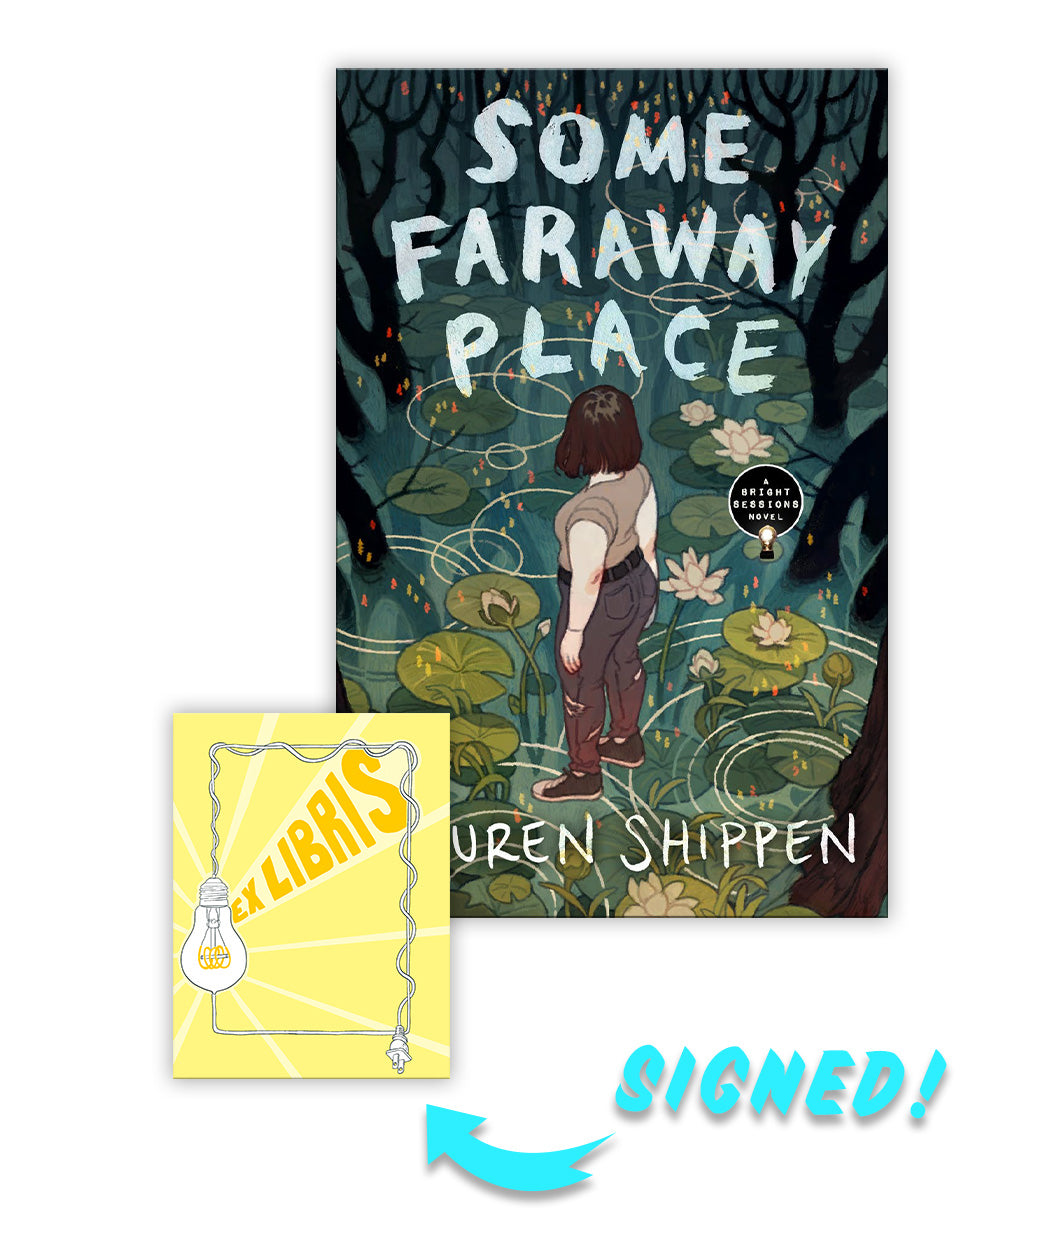 The cover of "Some Faraway Place" by "Lauren Shipped". The cover is an illustration of a person looking into a swamp with trees and lily pads. There is also a yellow, signed bookplate that says "Ex Libris".